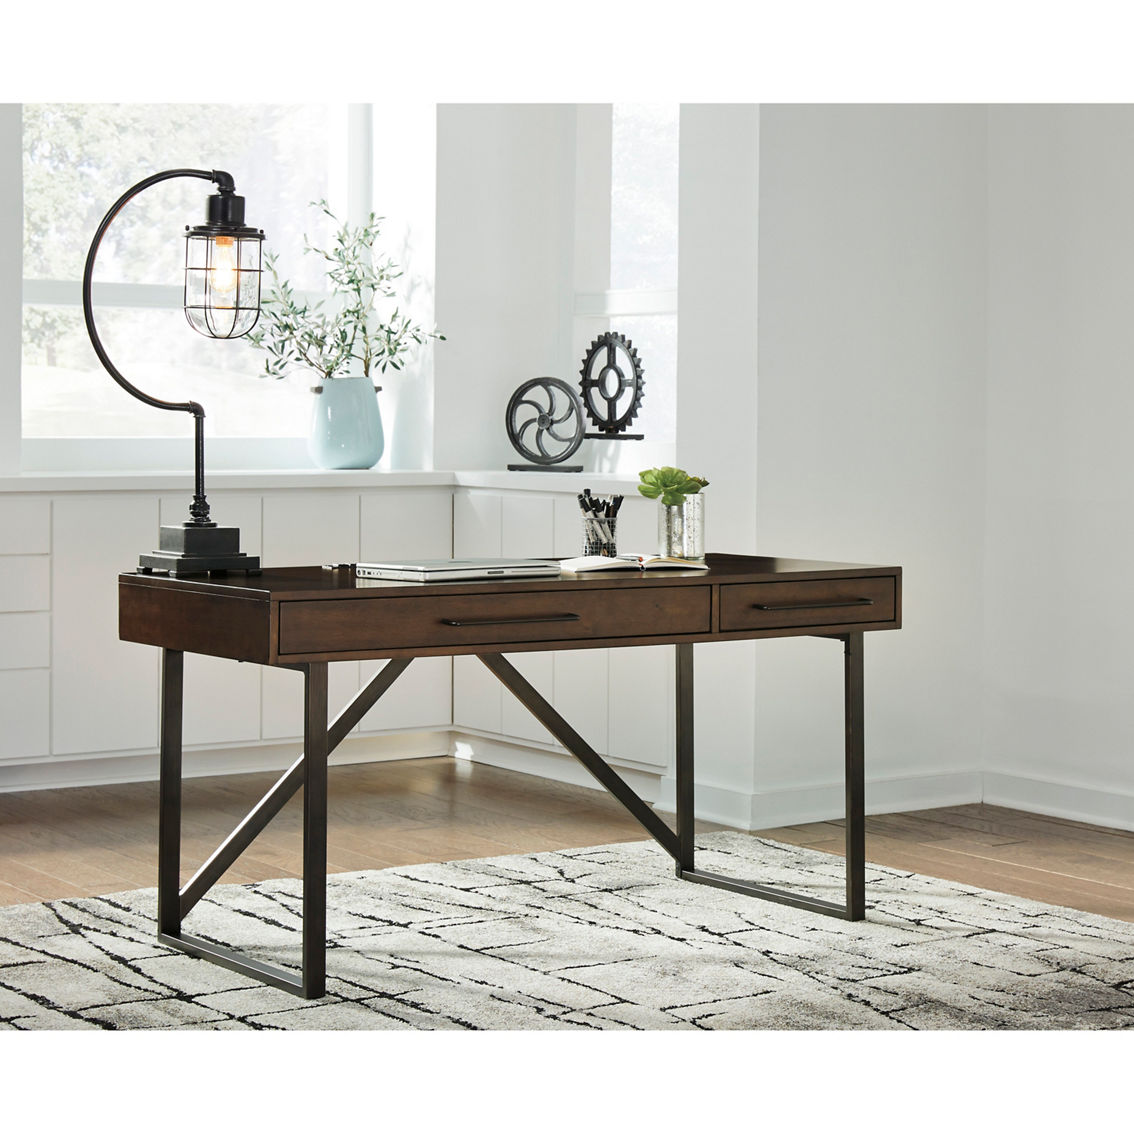 Signature Design by Ashley Starmore 60 in. Desk with Return and Bookcase - Image 5 of 9